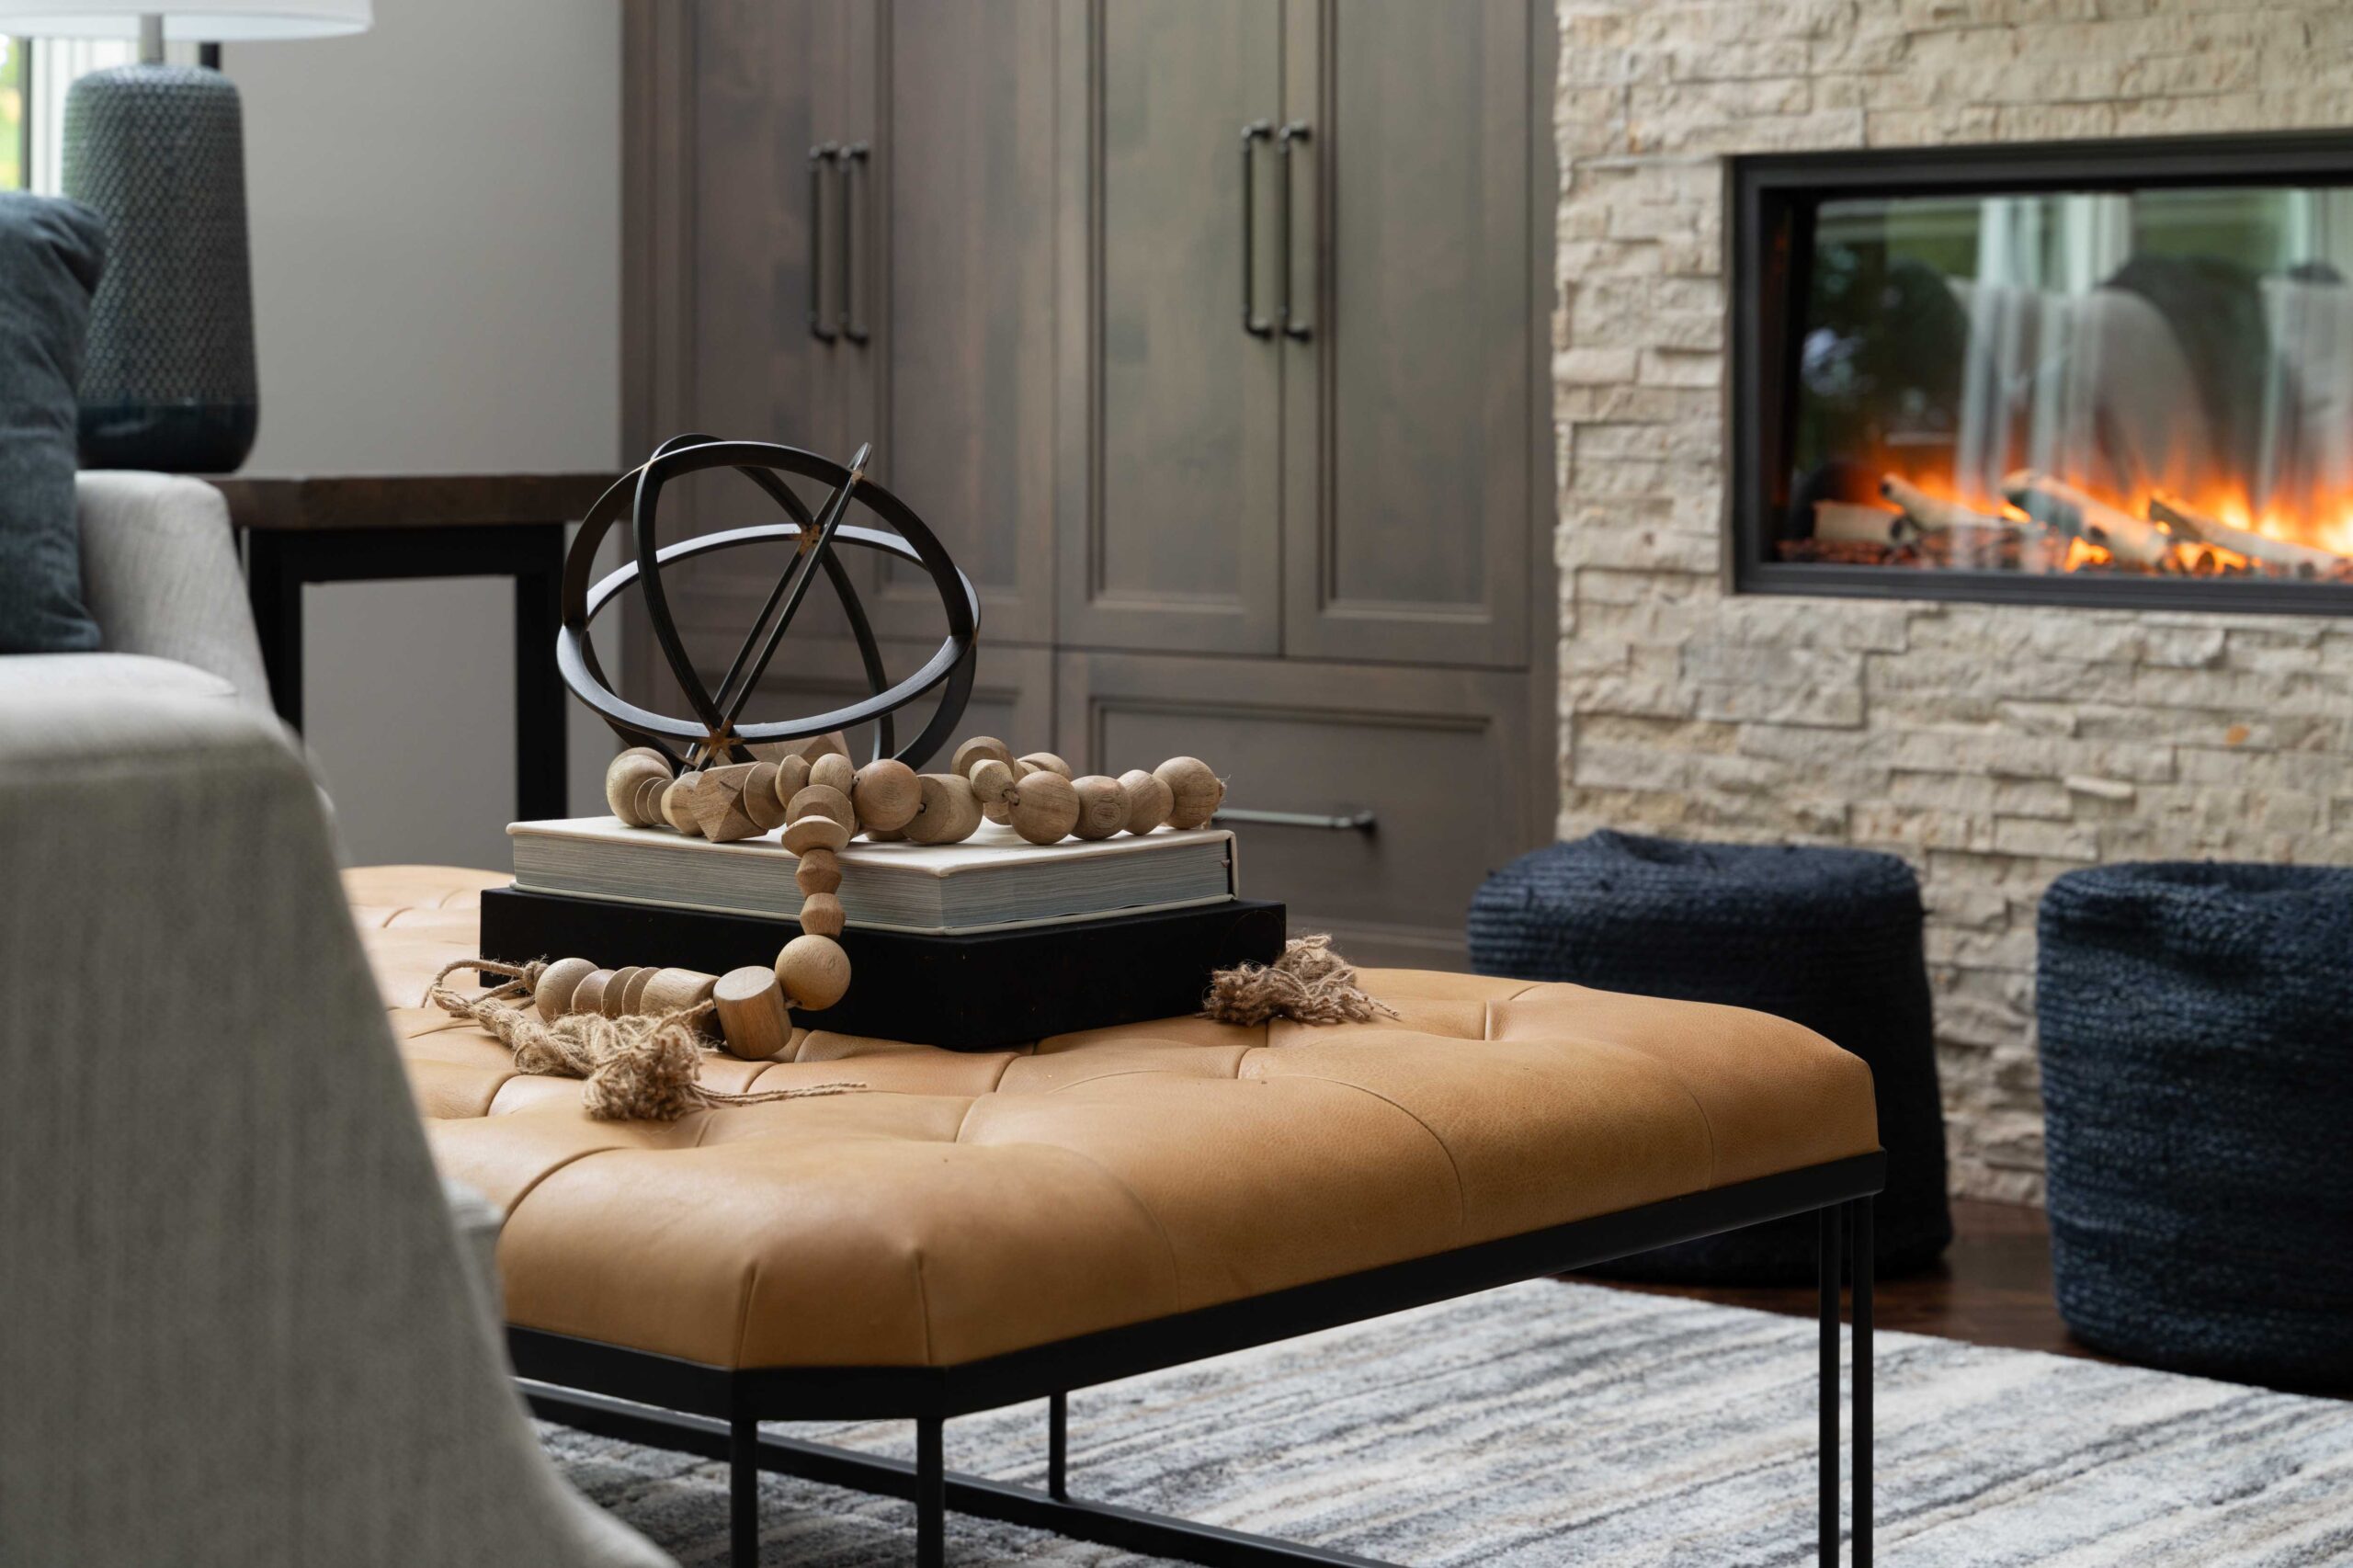 Great Waters Alcove Remodel: A living room with a stone fireplace and ottoman.